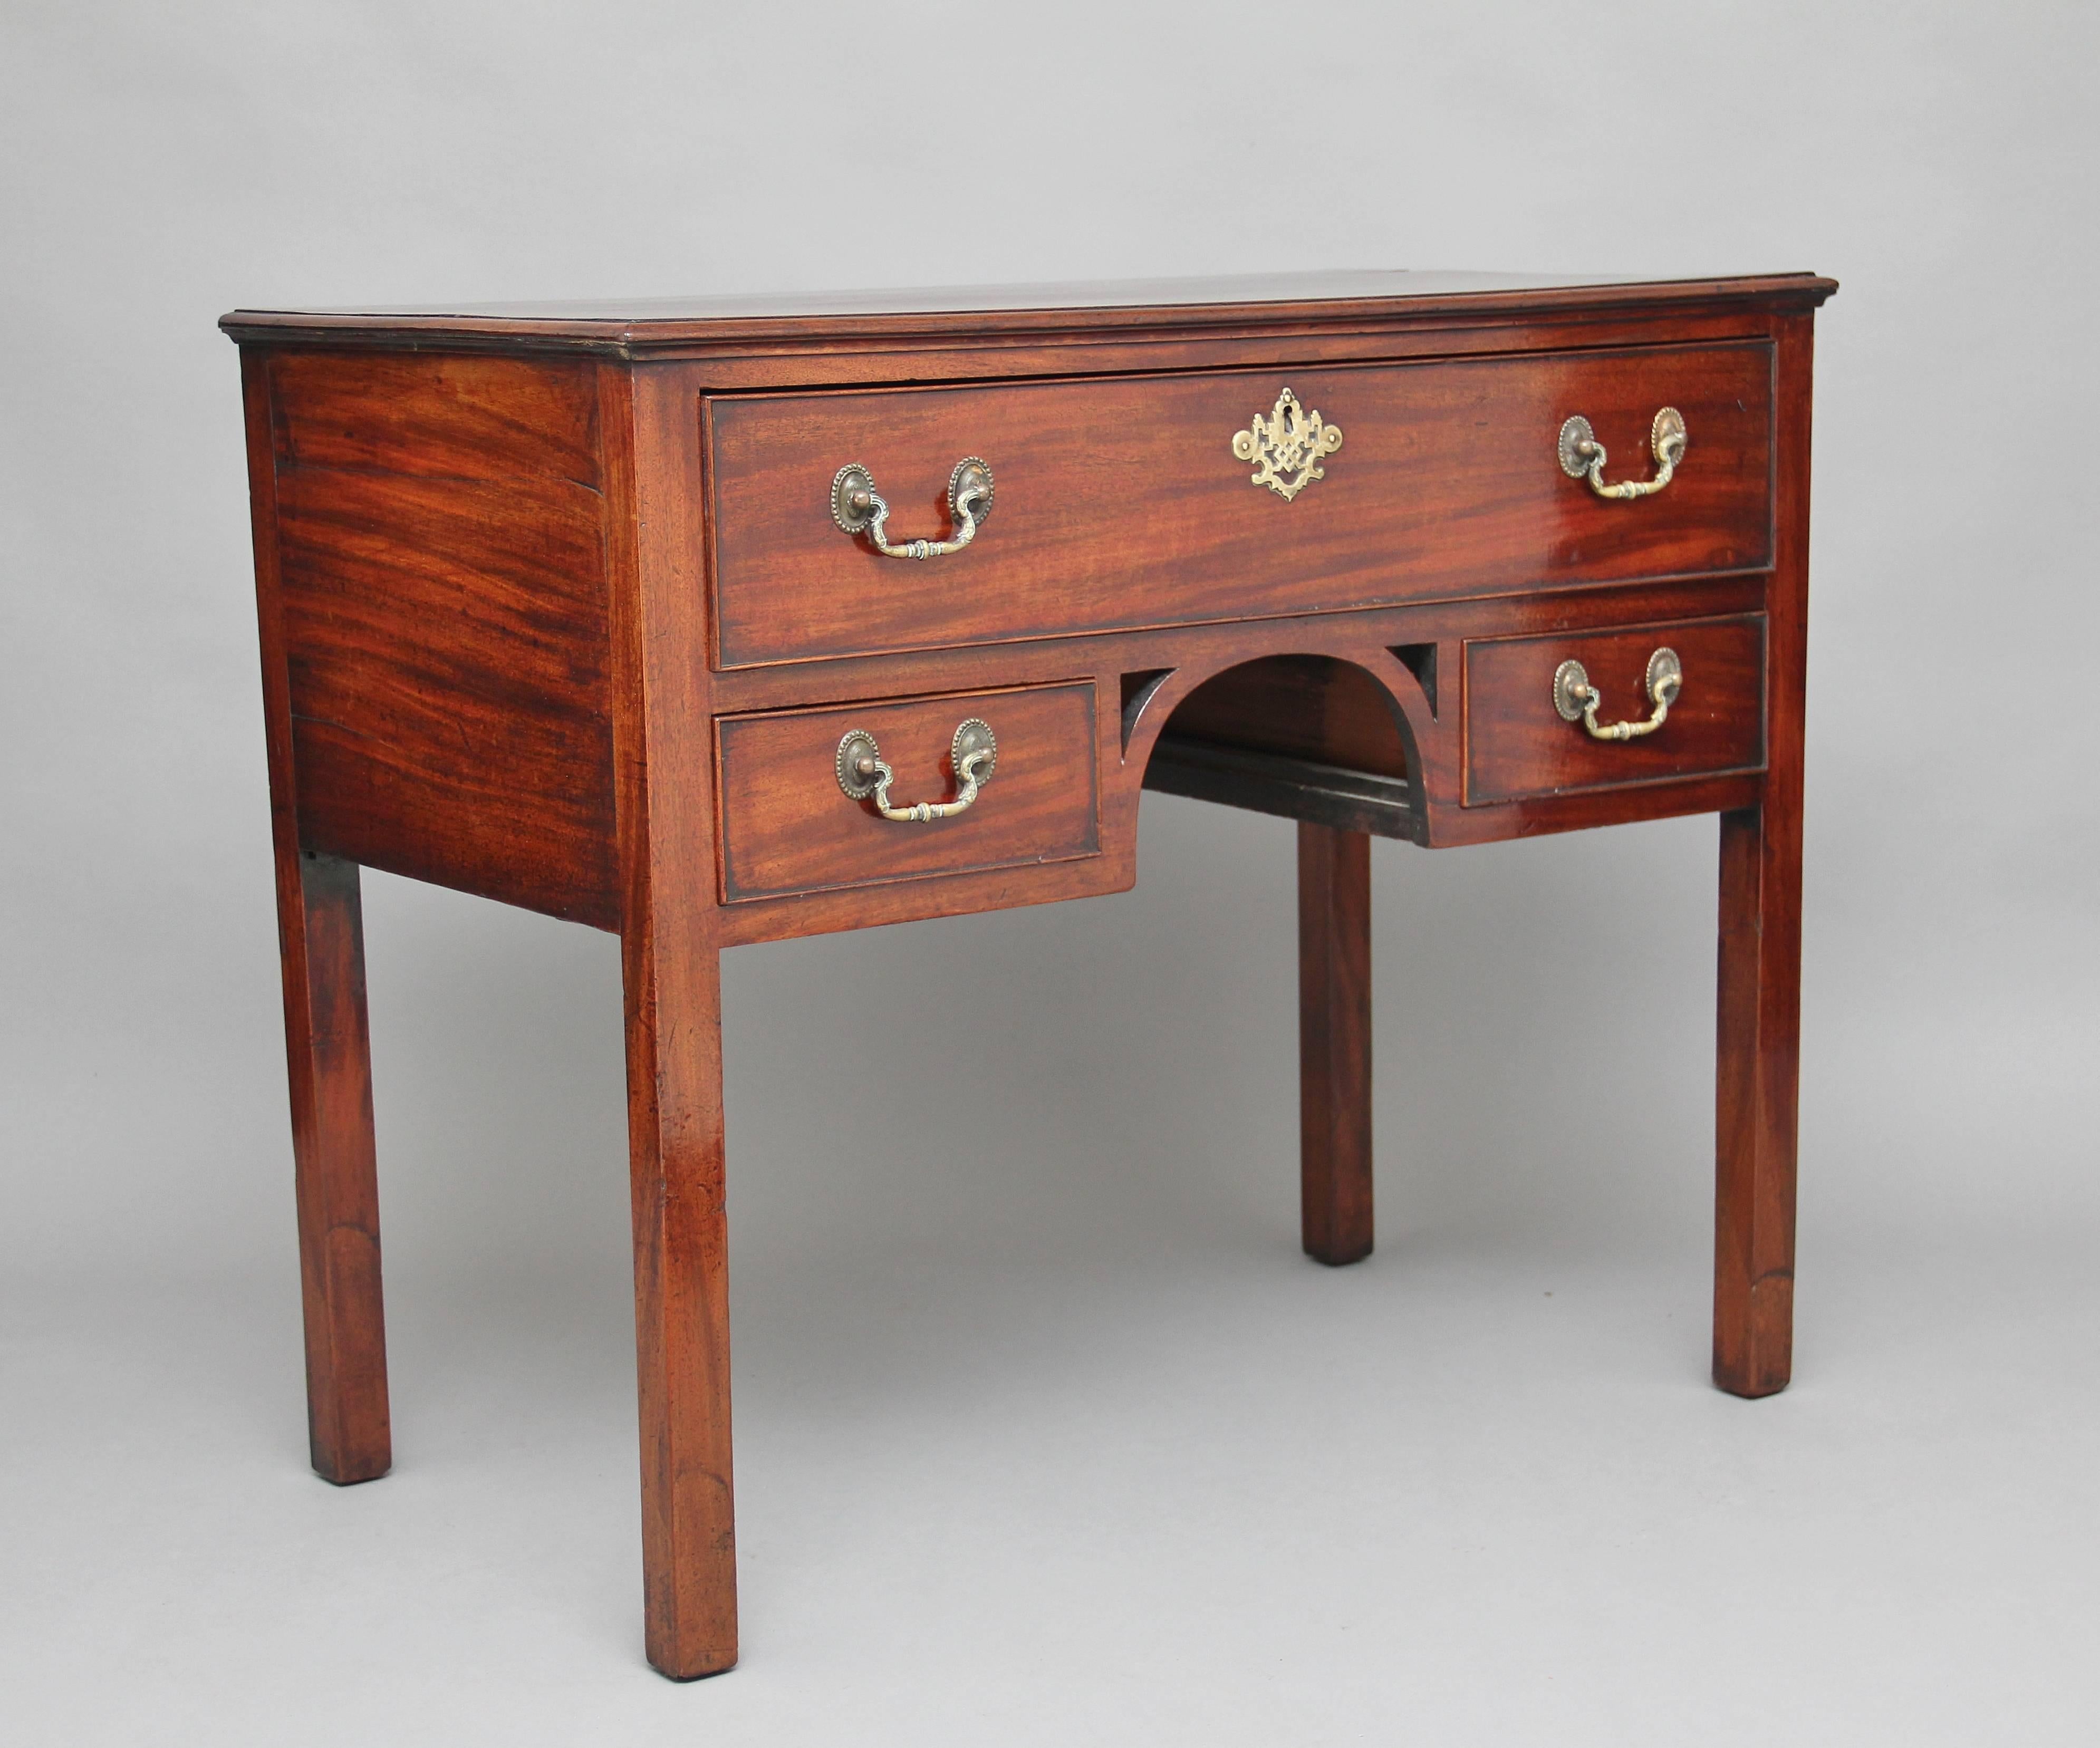 18th century mahogany lowboy or side table, the rectangular moulded edge top above a selection of three drawers with brass swan neck handles, a nice arched structure at the centre in between the bottom two drawers, supported on square legs, circa